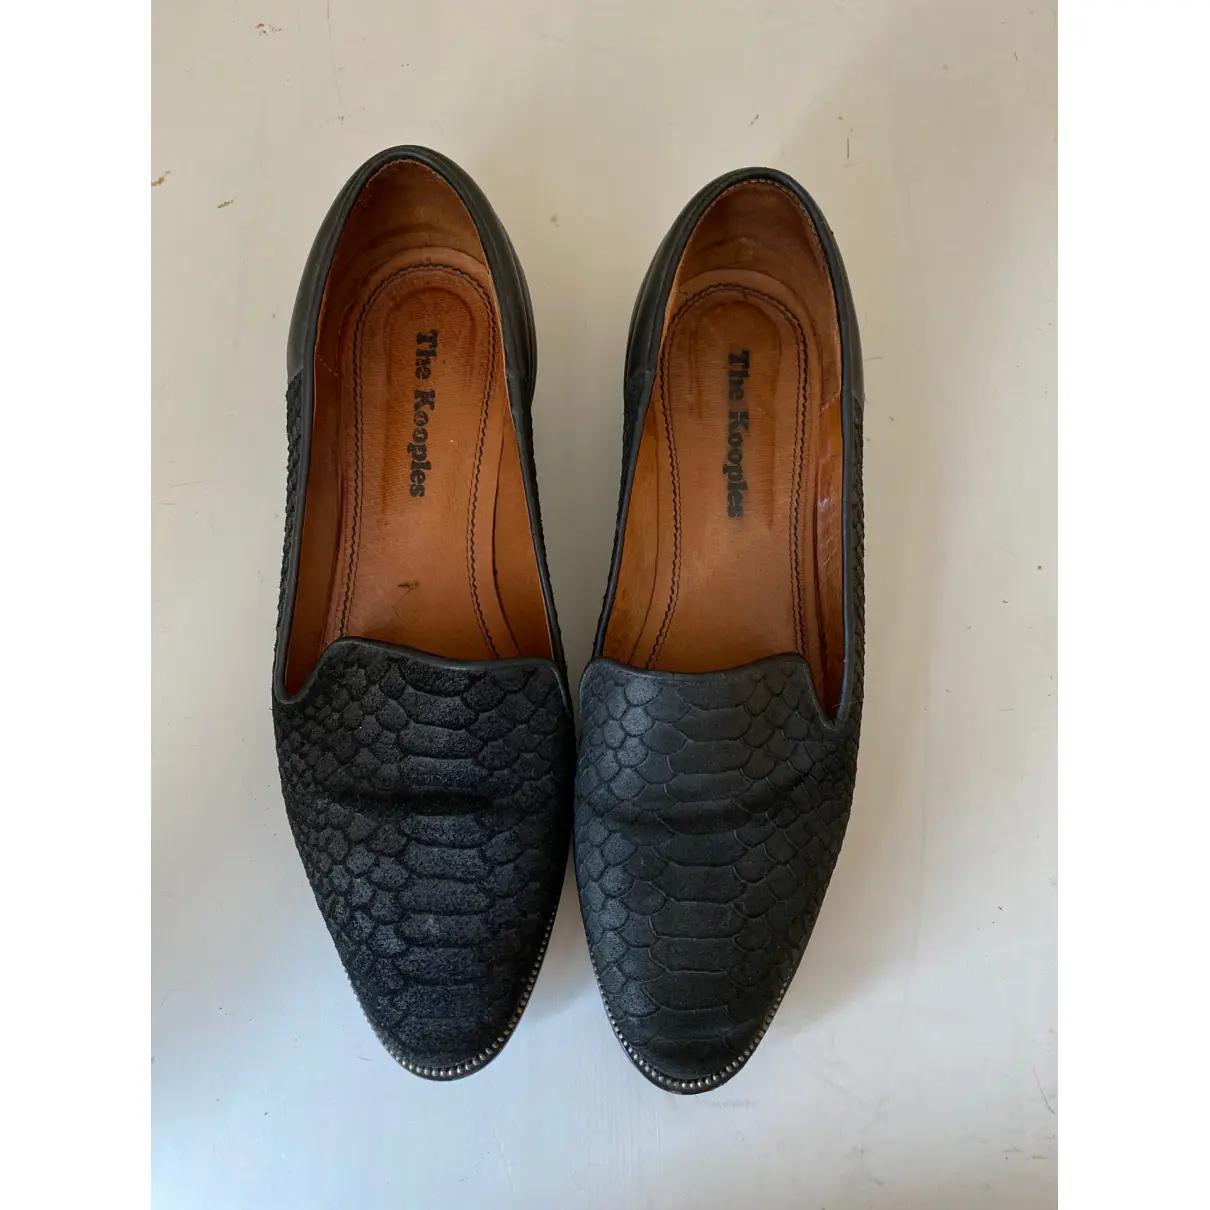 Buy The Kooples Leather flats online